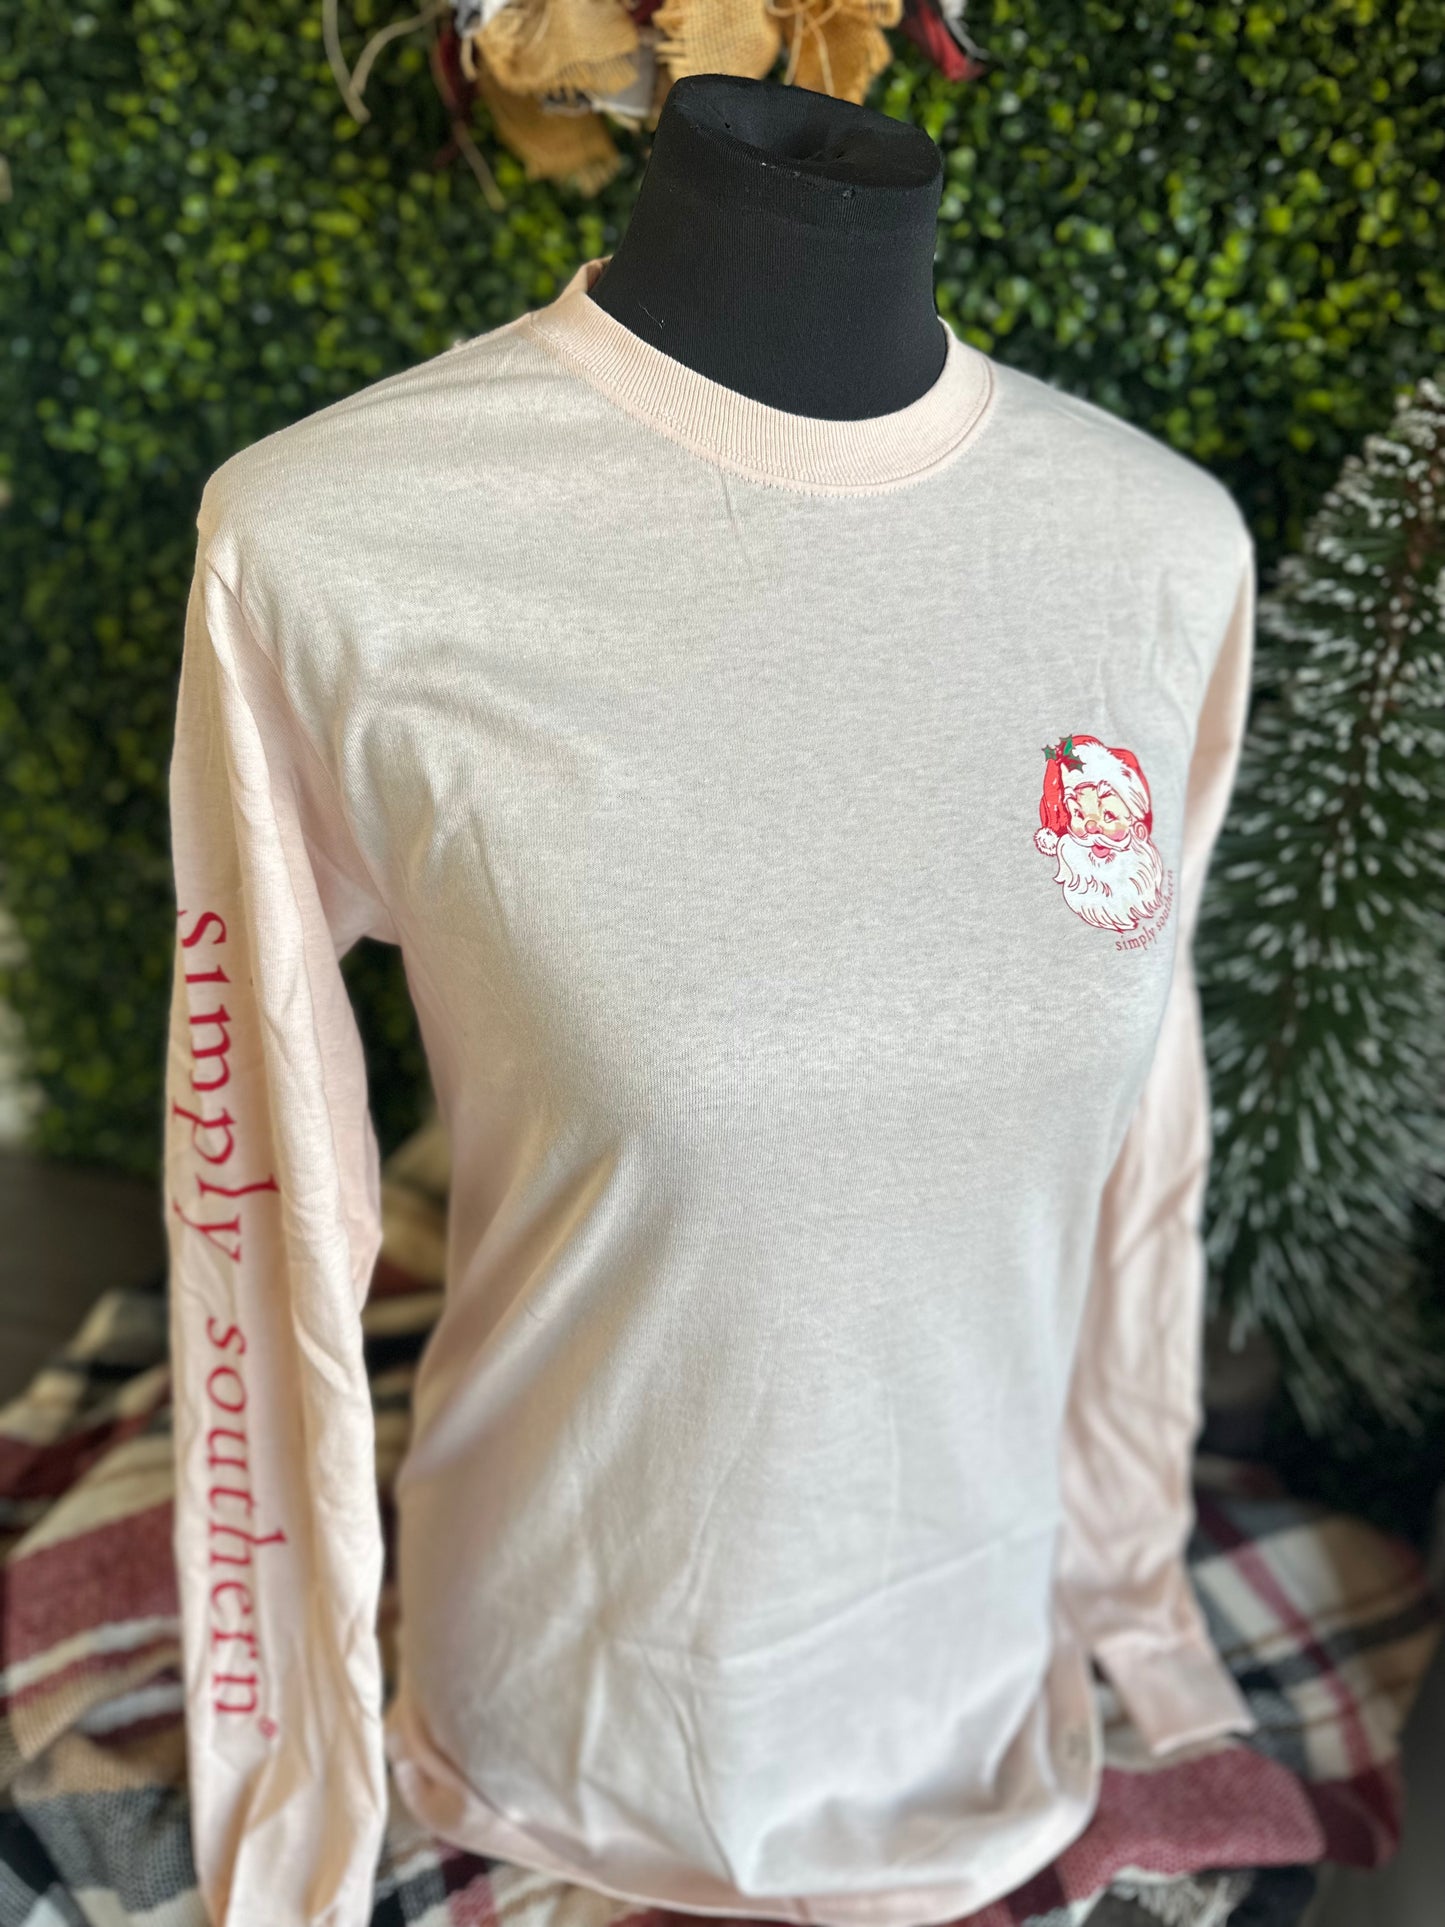 FINAL SALE - Simply Southern - Have Yourself A Merry Little Christmas Long Sleeve Tee